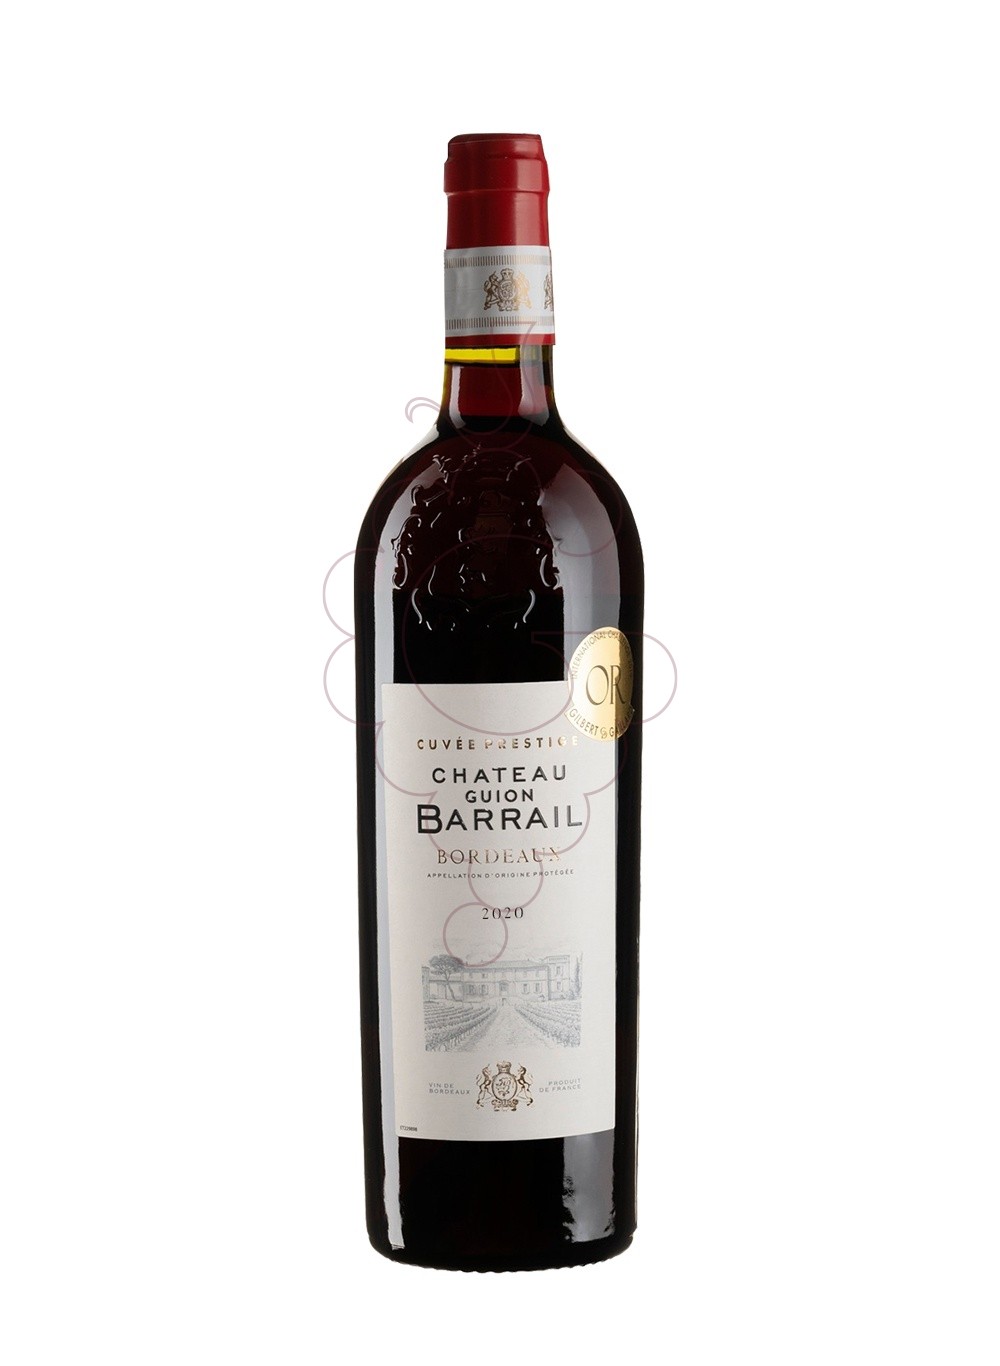 Photo Ch guion barrail bdx ng 2020 red wine